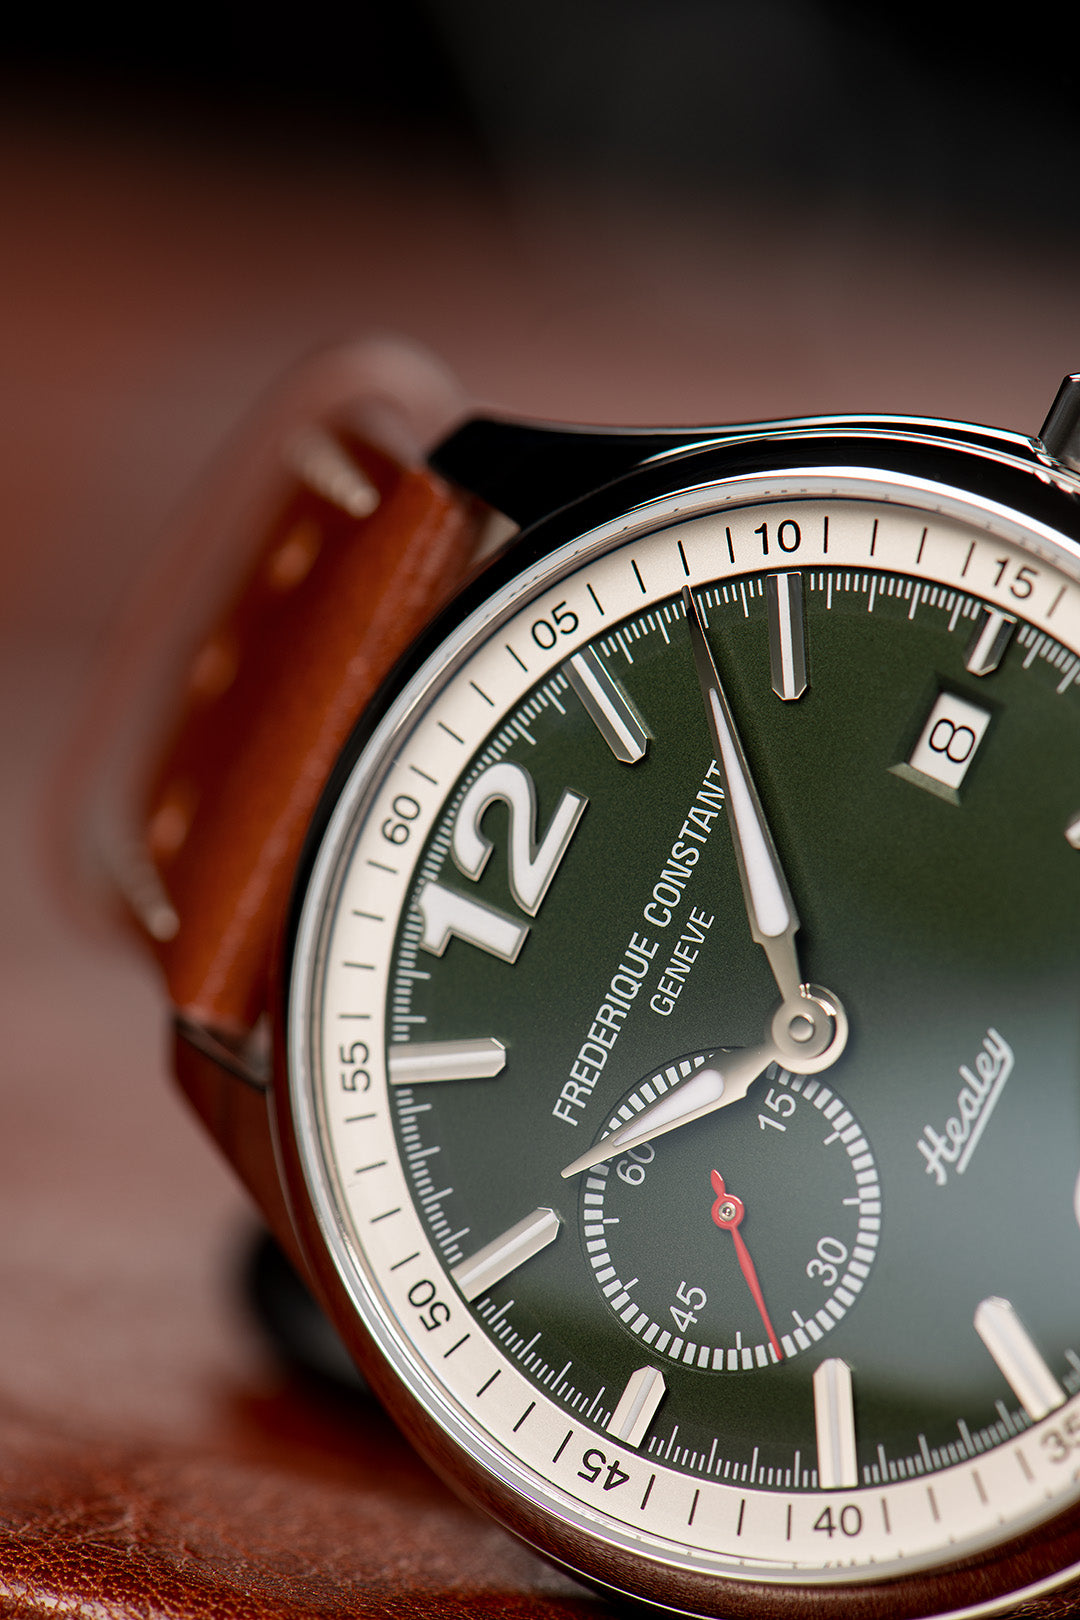 Frederique Constant Vintage Rally Healey Limited Edition Automatic (Green Dial / 40mm)